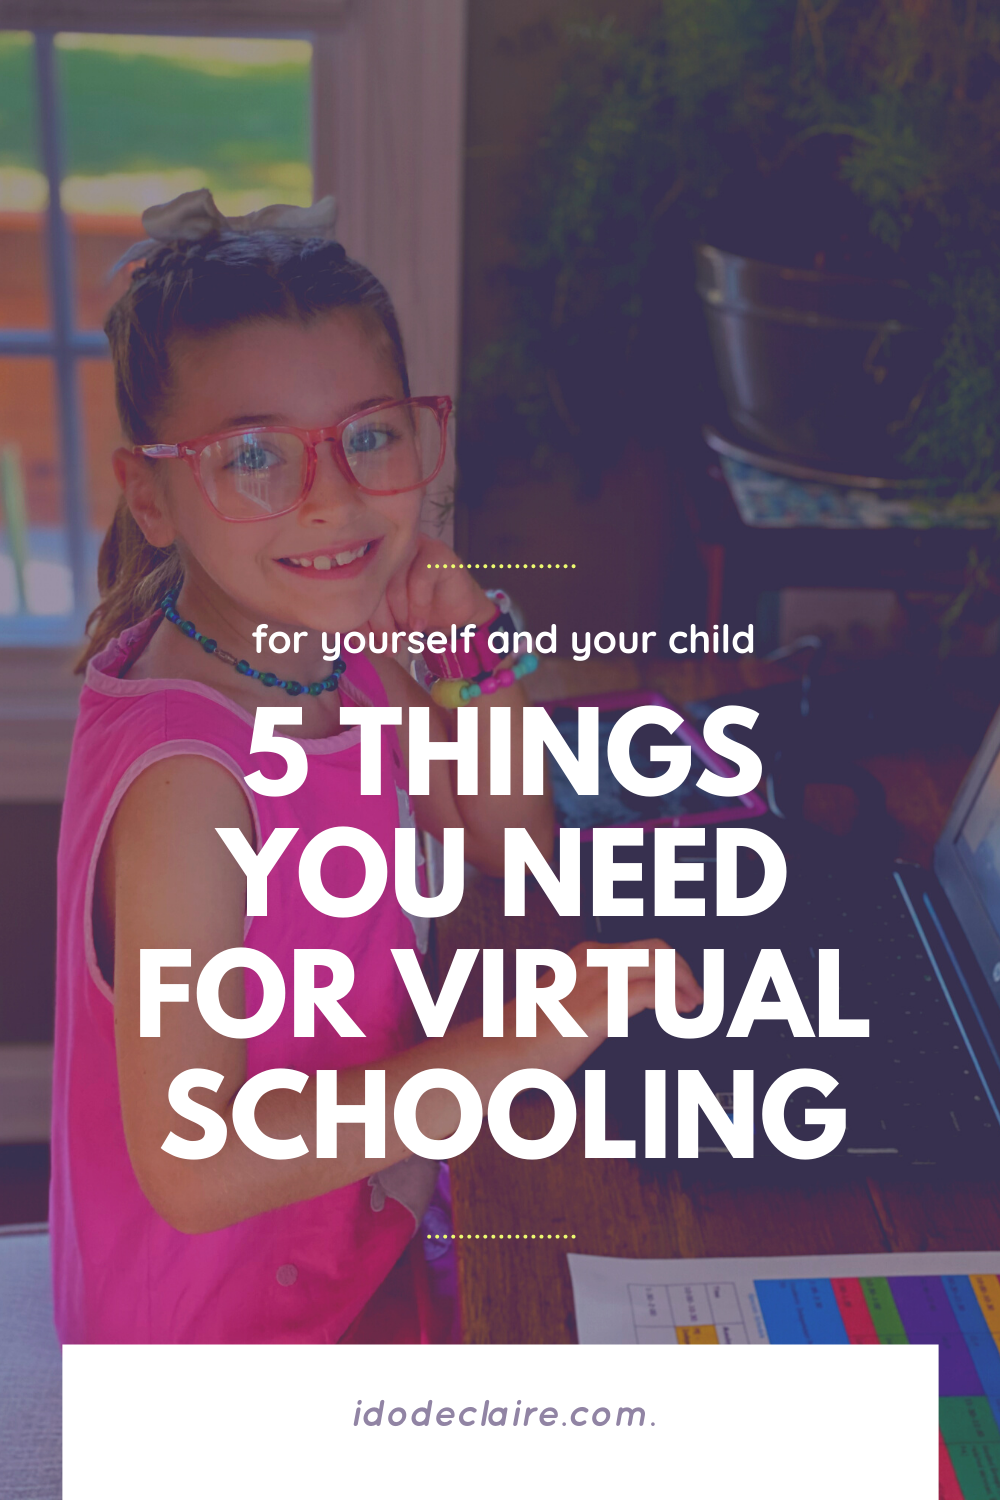 5 Things You Need for Virtual Schooling (for yourself and your child)